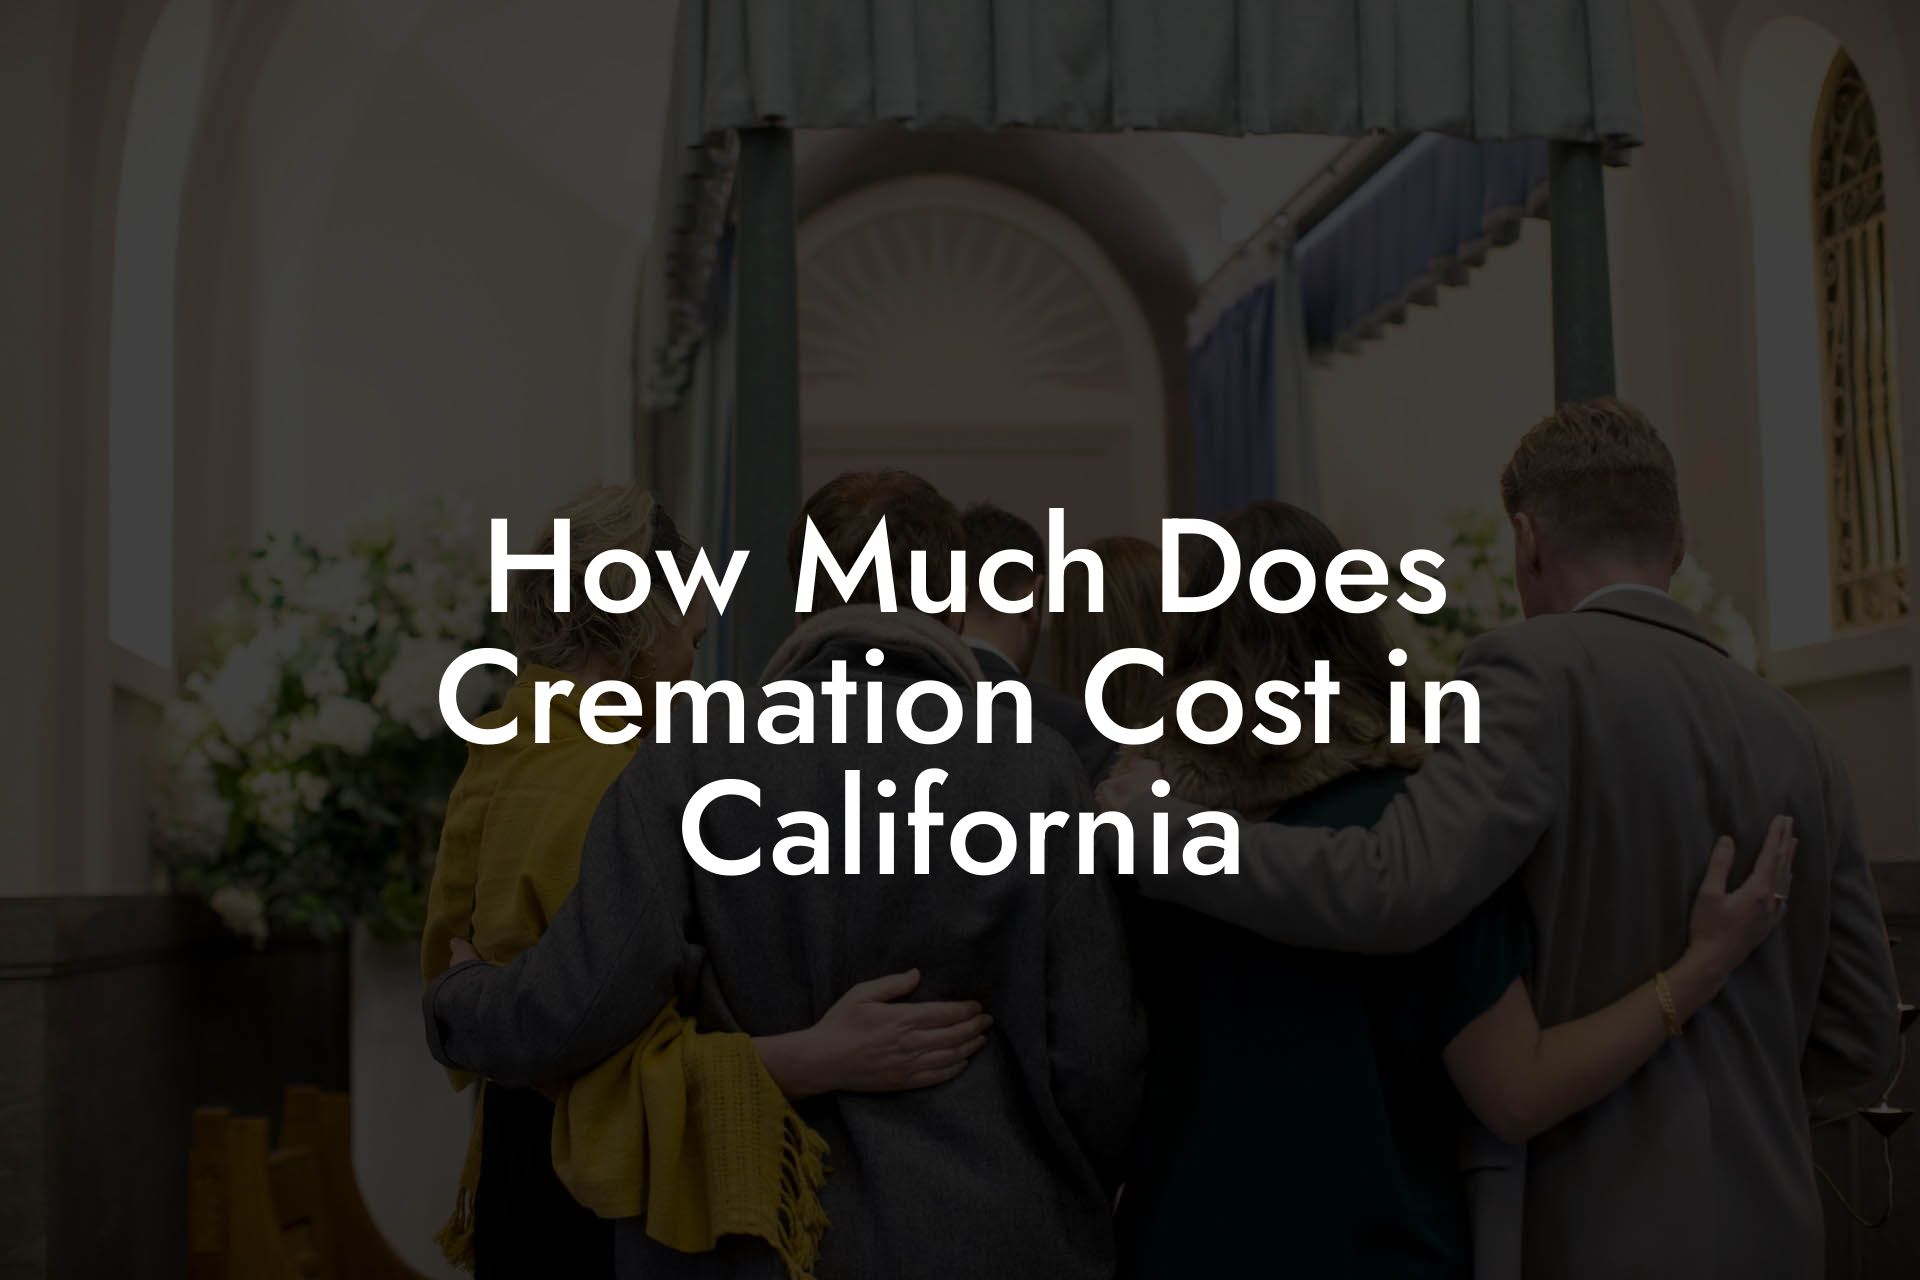 How Much Does Cremation Cost in California